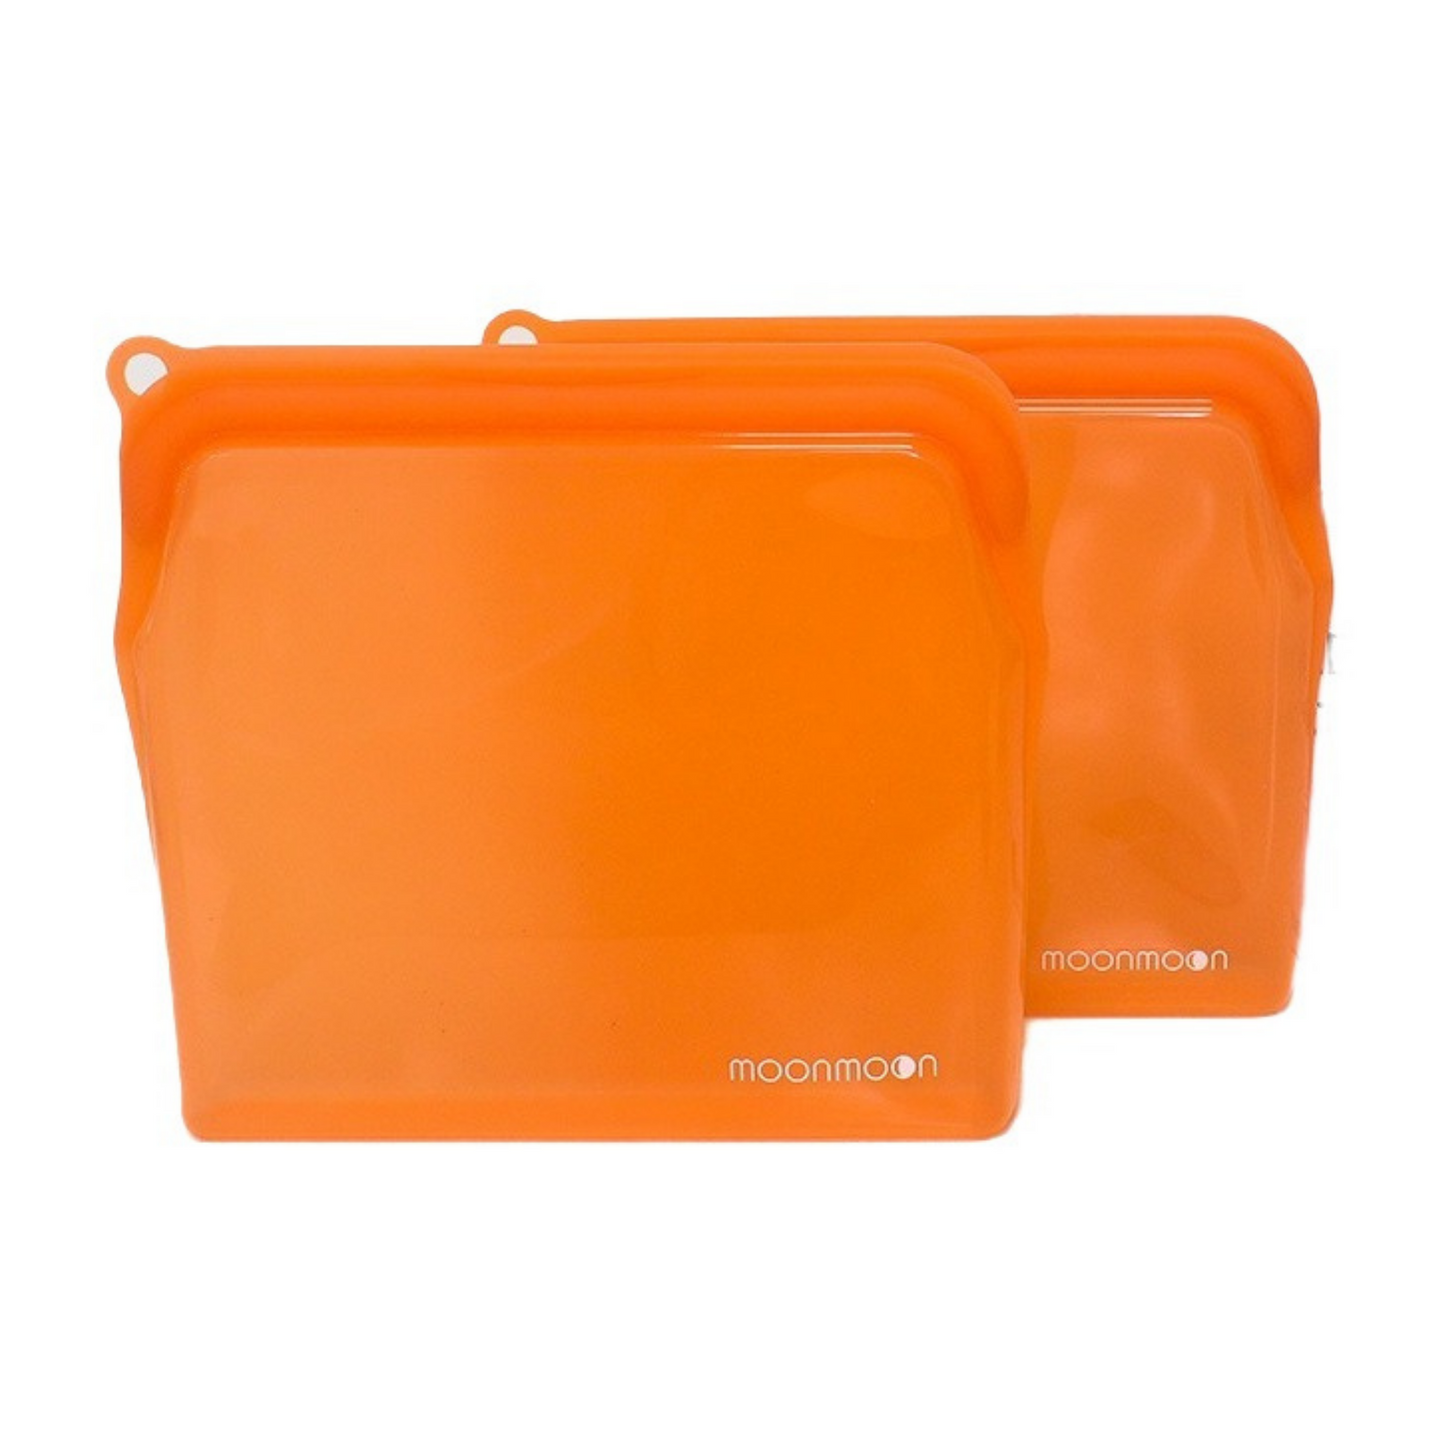 Load image into Gallery viewer, silicone bags uk reusable silicone freezer bags uk reusable silicone food bags uk reusable freezer bags silicone silicone ziplock bags uk reusable silicone pouches best silicone freezer bags uk silicone food bags dishwasher safe best reusable silicone bags (uk) silicone freezer bag, stasher bags
